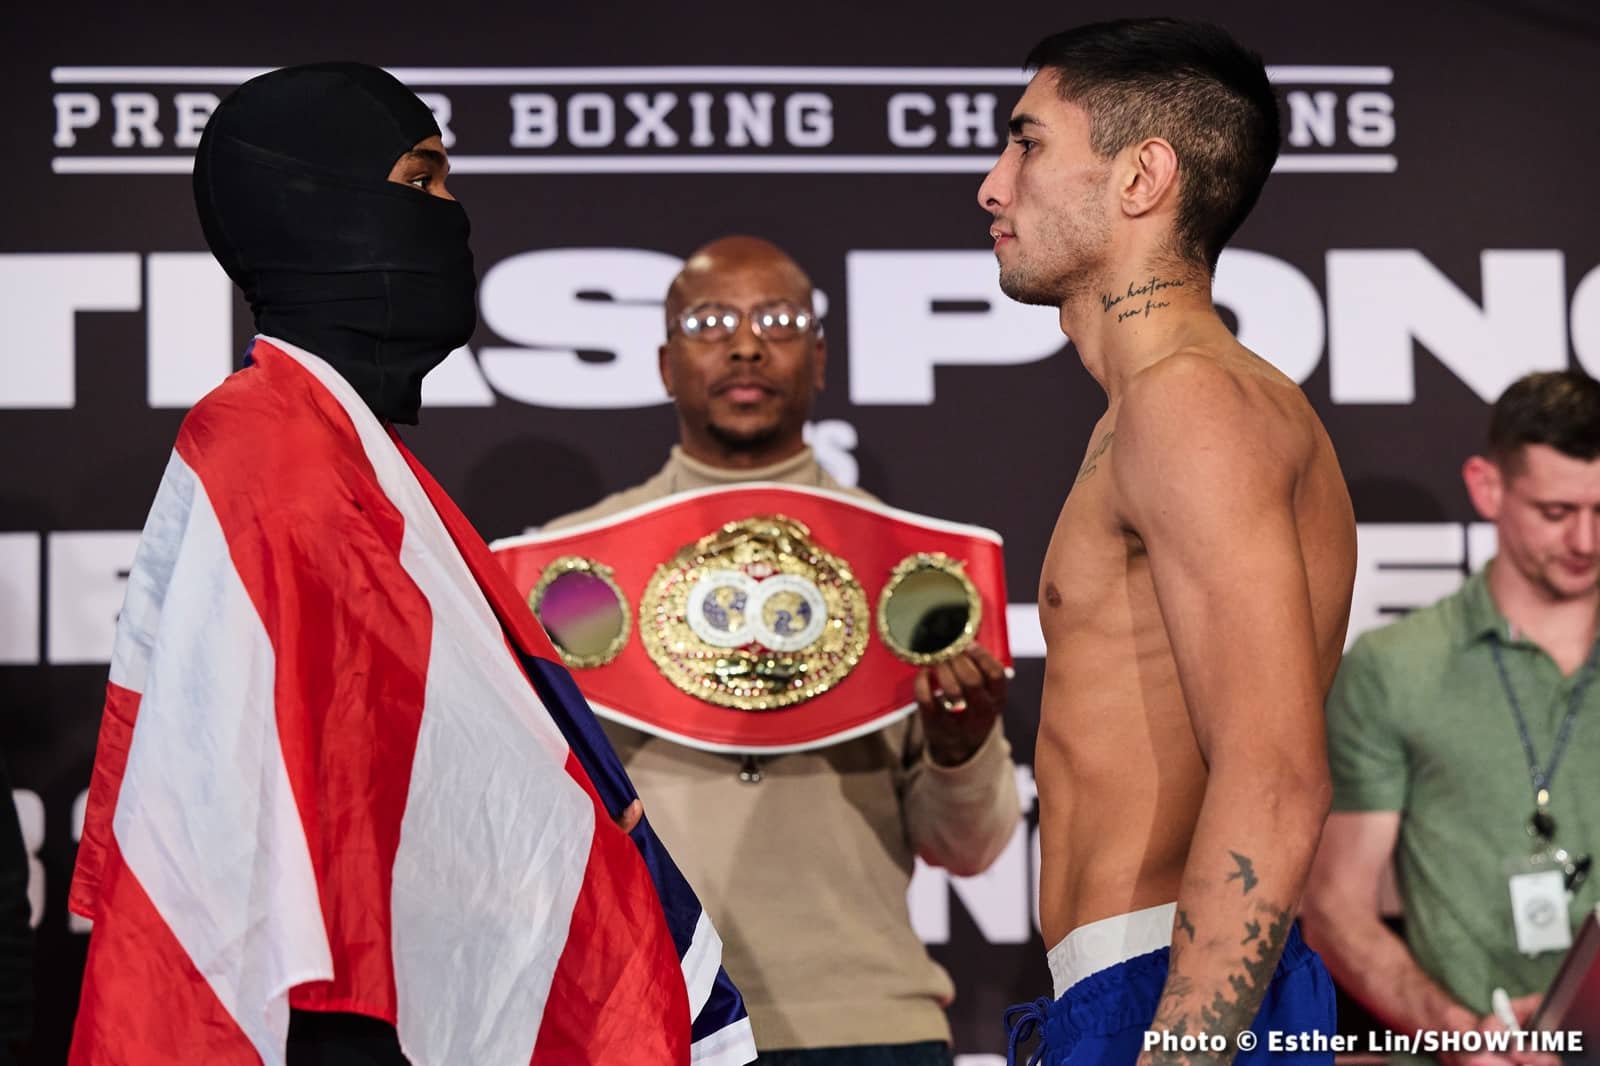 Tonight: Matias Vs. Ponce – Live Results